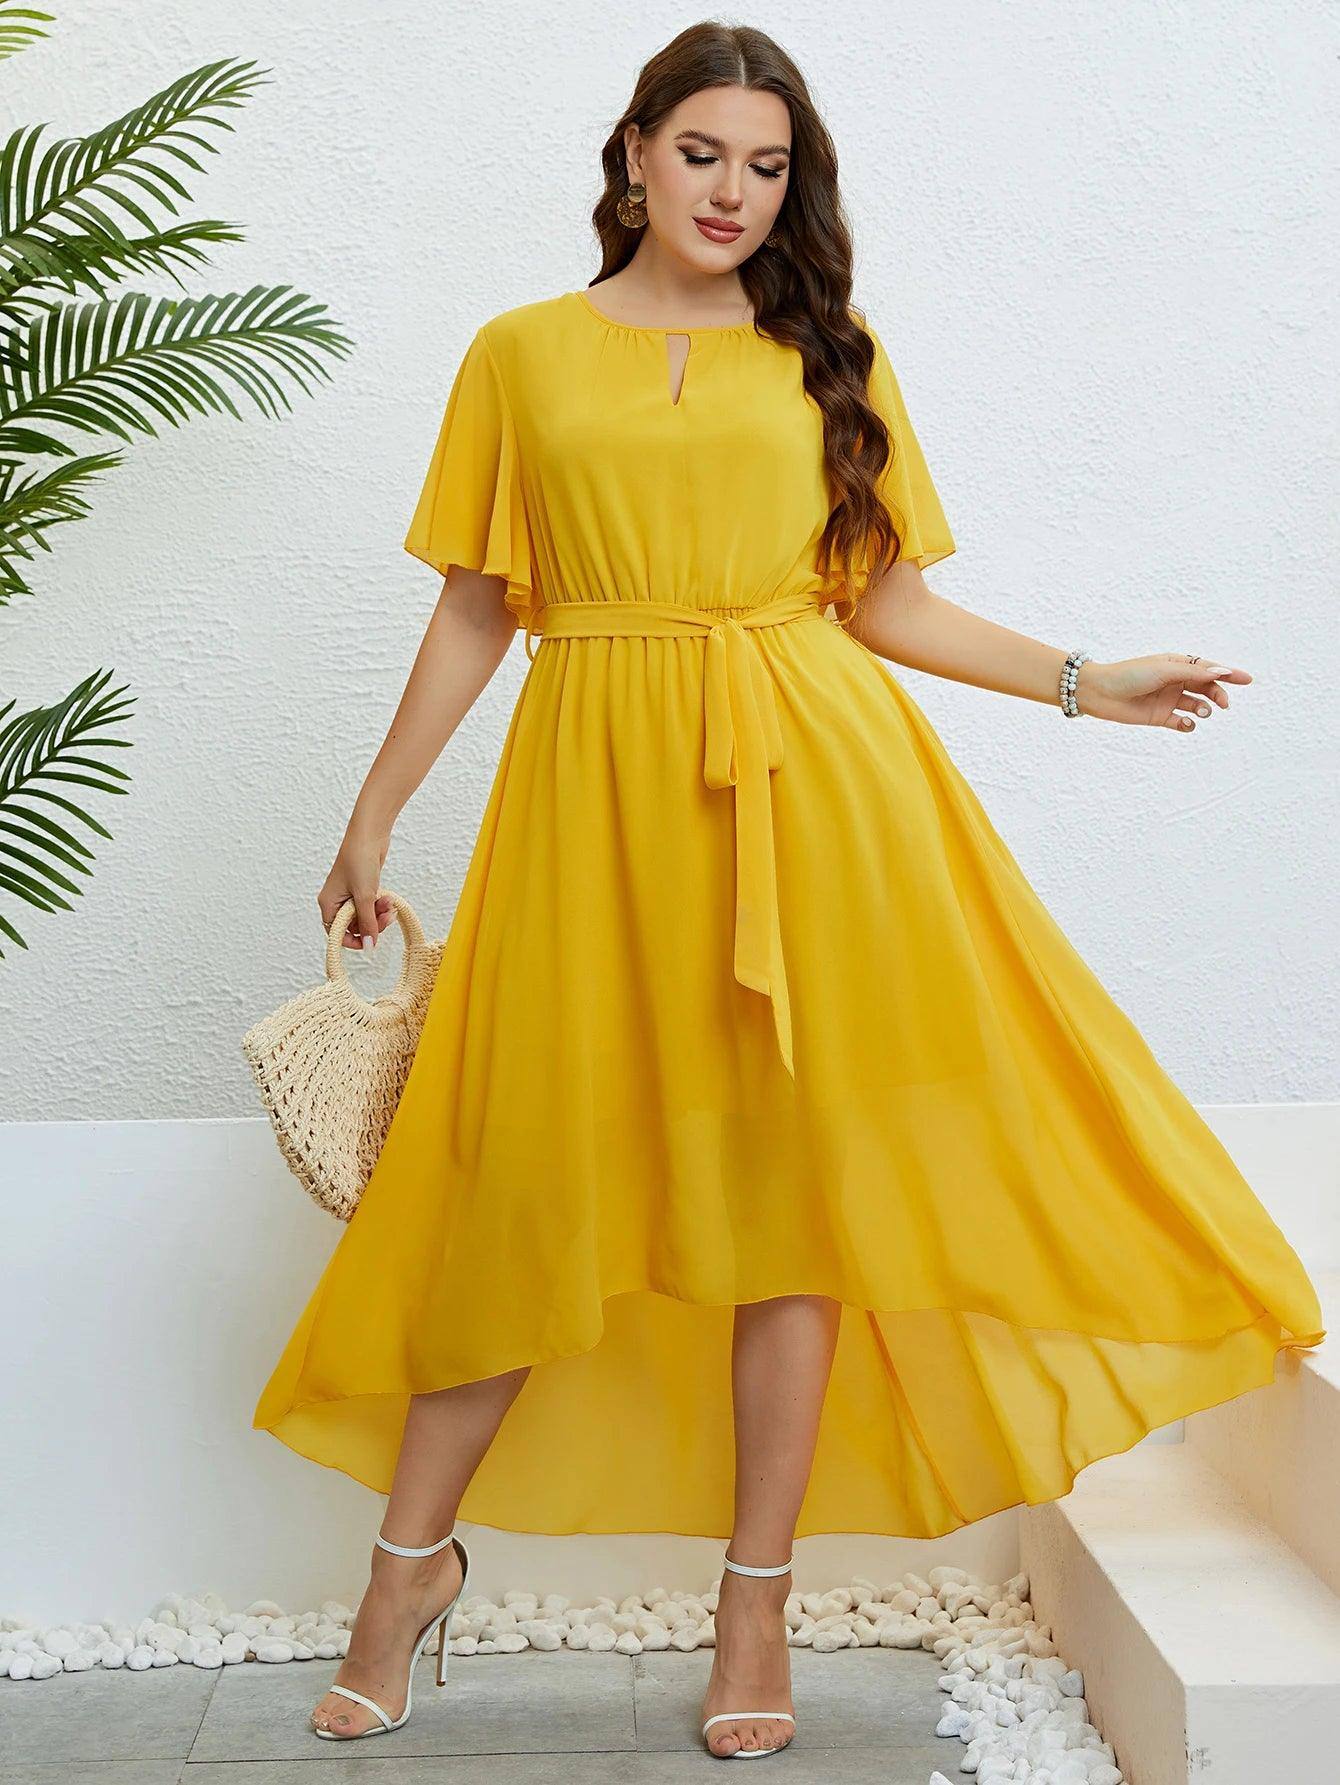 Chiffon Party Dresses For Women Plus Size Summer Solid Color-5